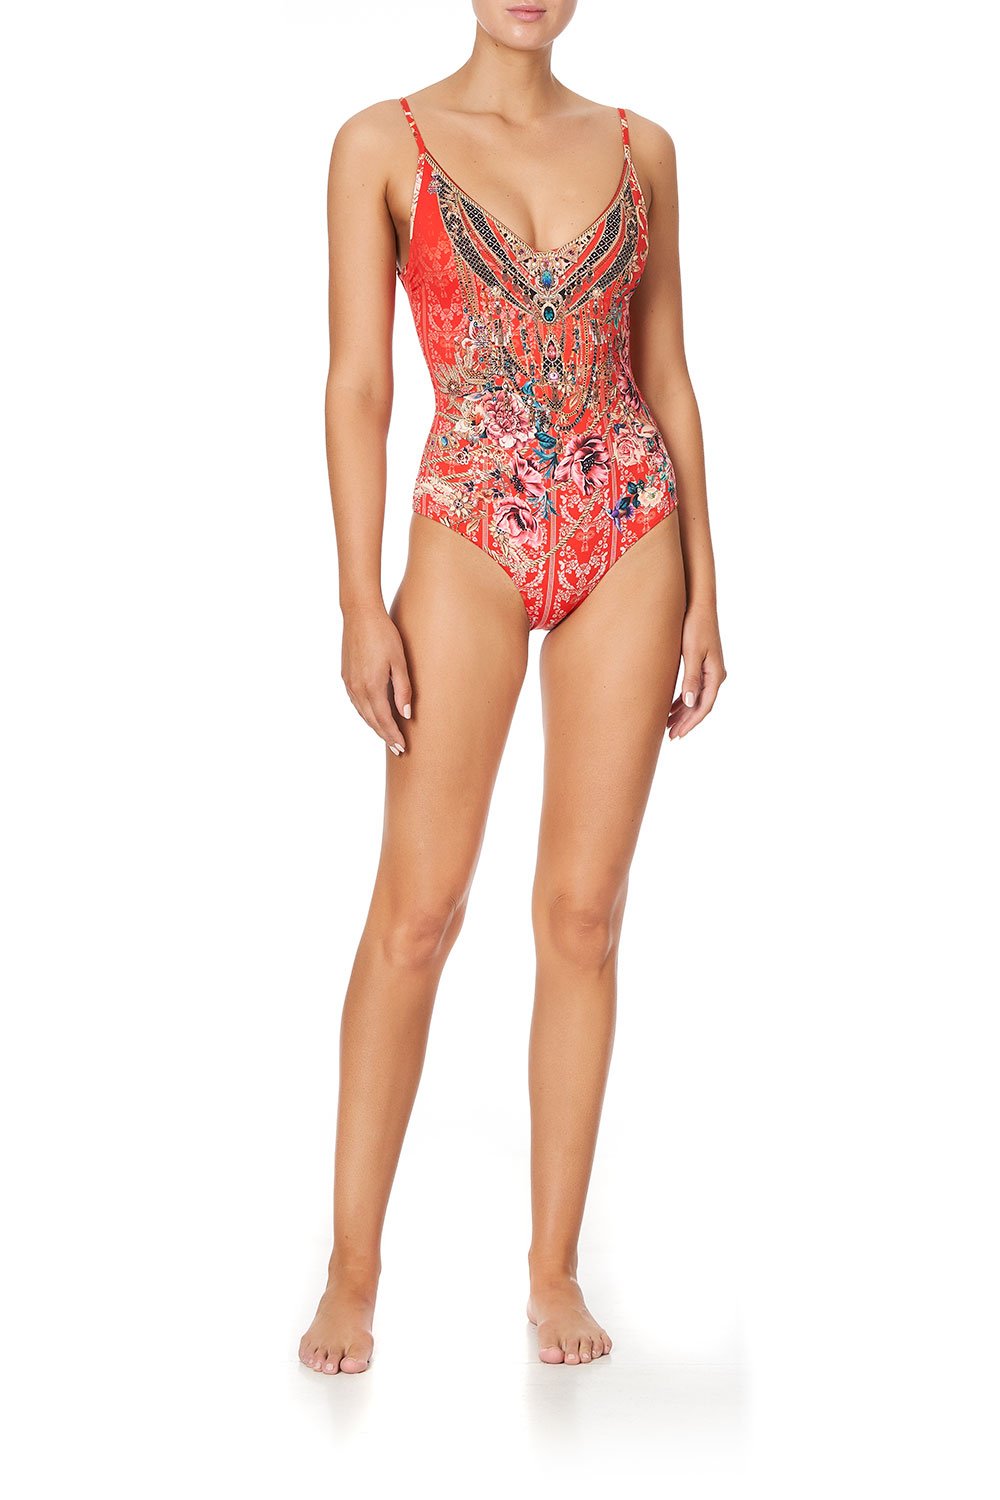 Adore Me 3X Red One Piece Pleated Front Swimsuit - $35 - From Jill